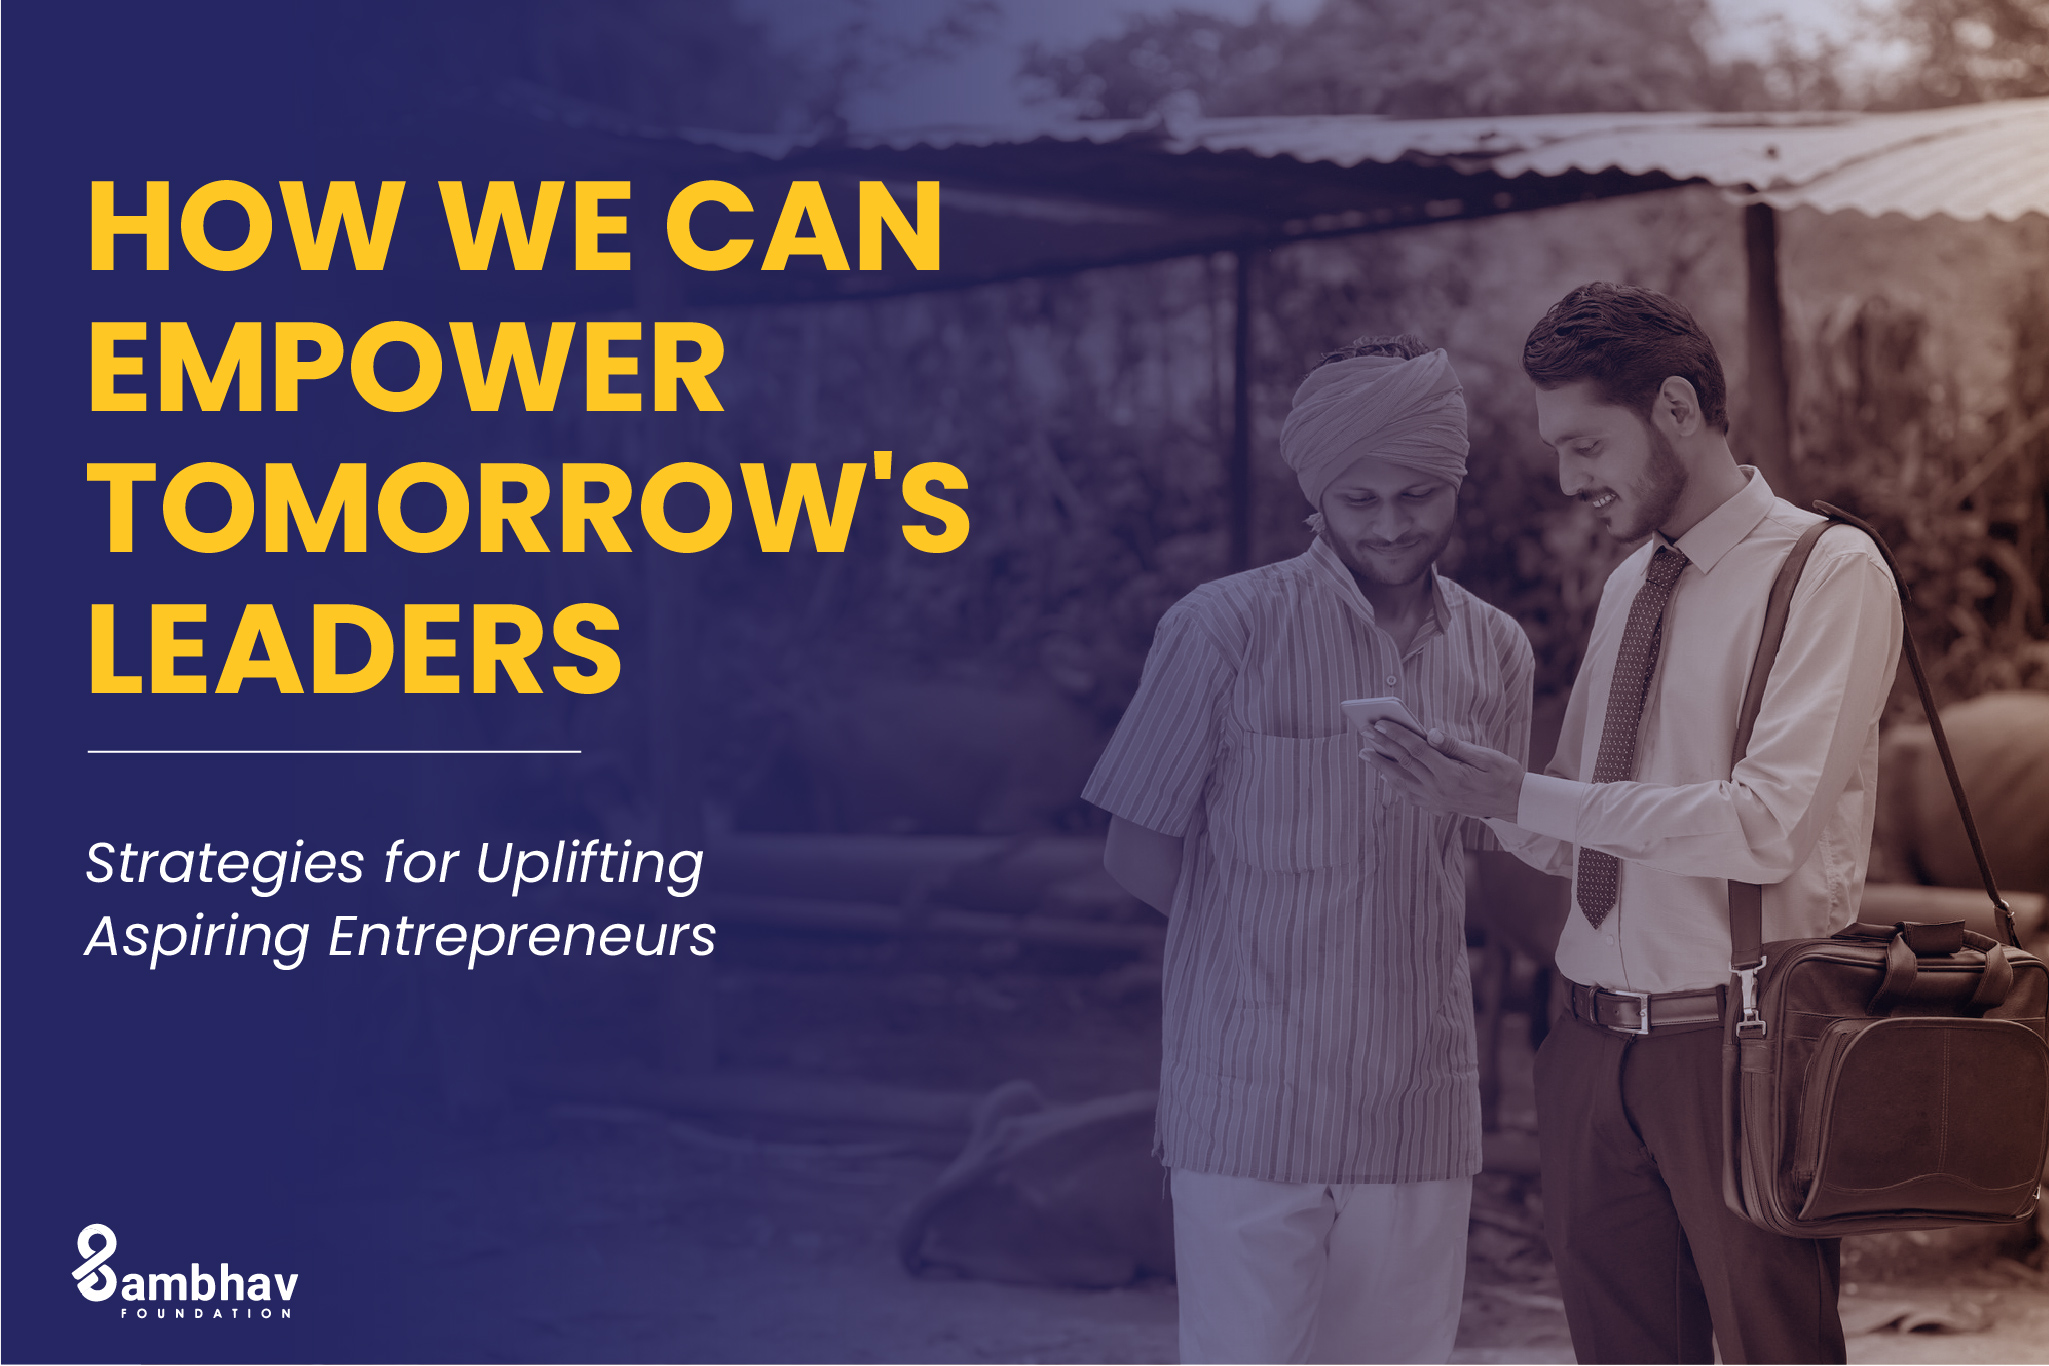 How We Can Empower Tomorrow's Leaders